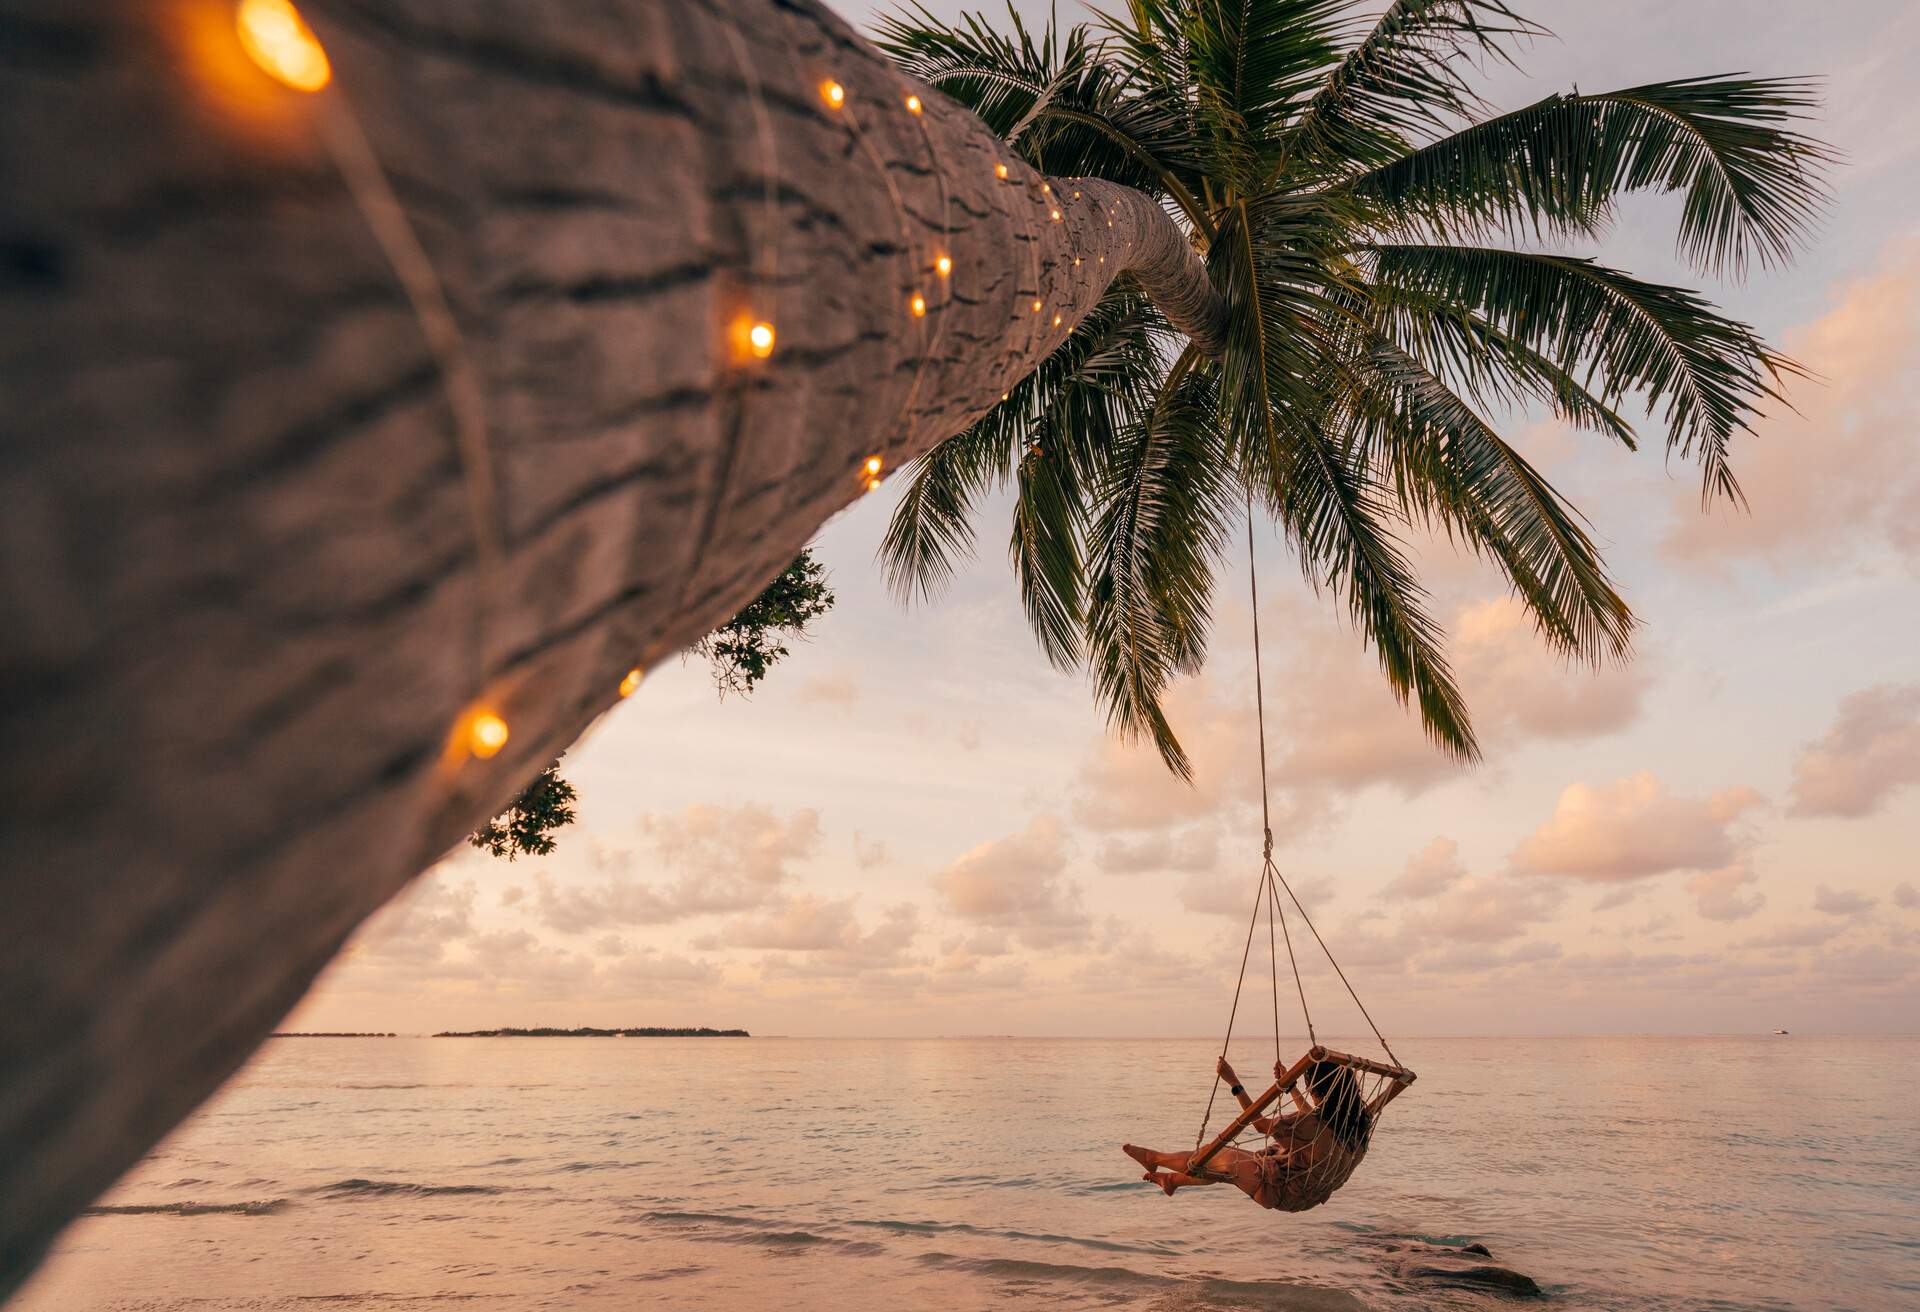 A young adult woman finds tranquilly, gently swaying on a swing tied to a palm tree.